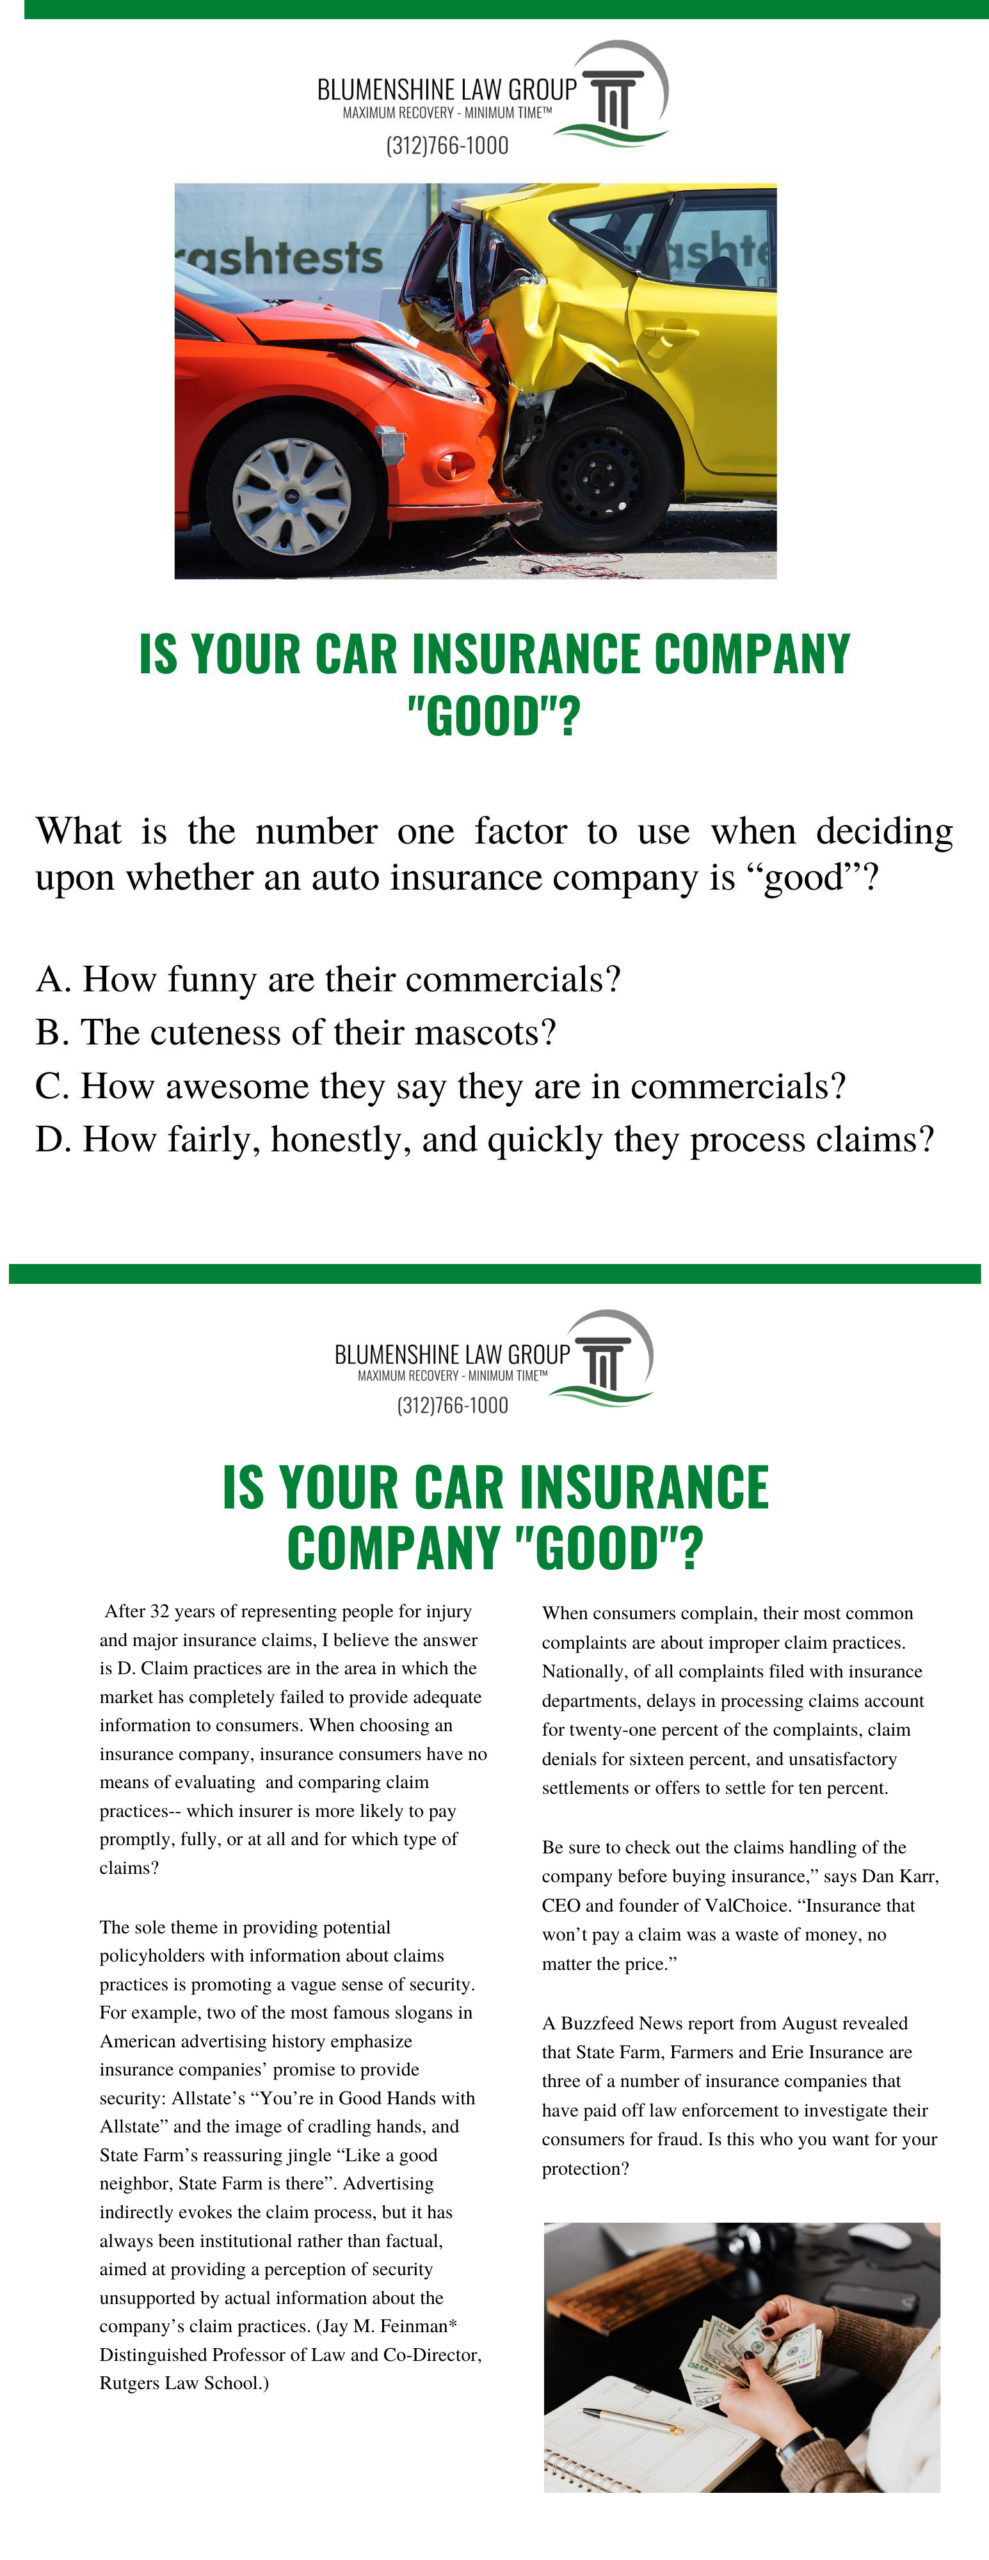 how good is your insurance company?